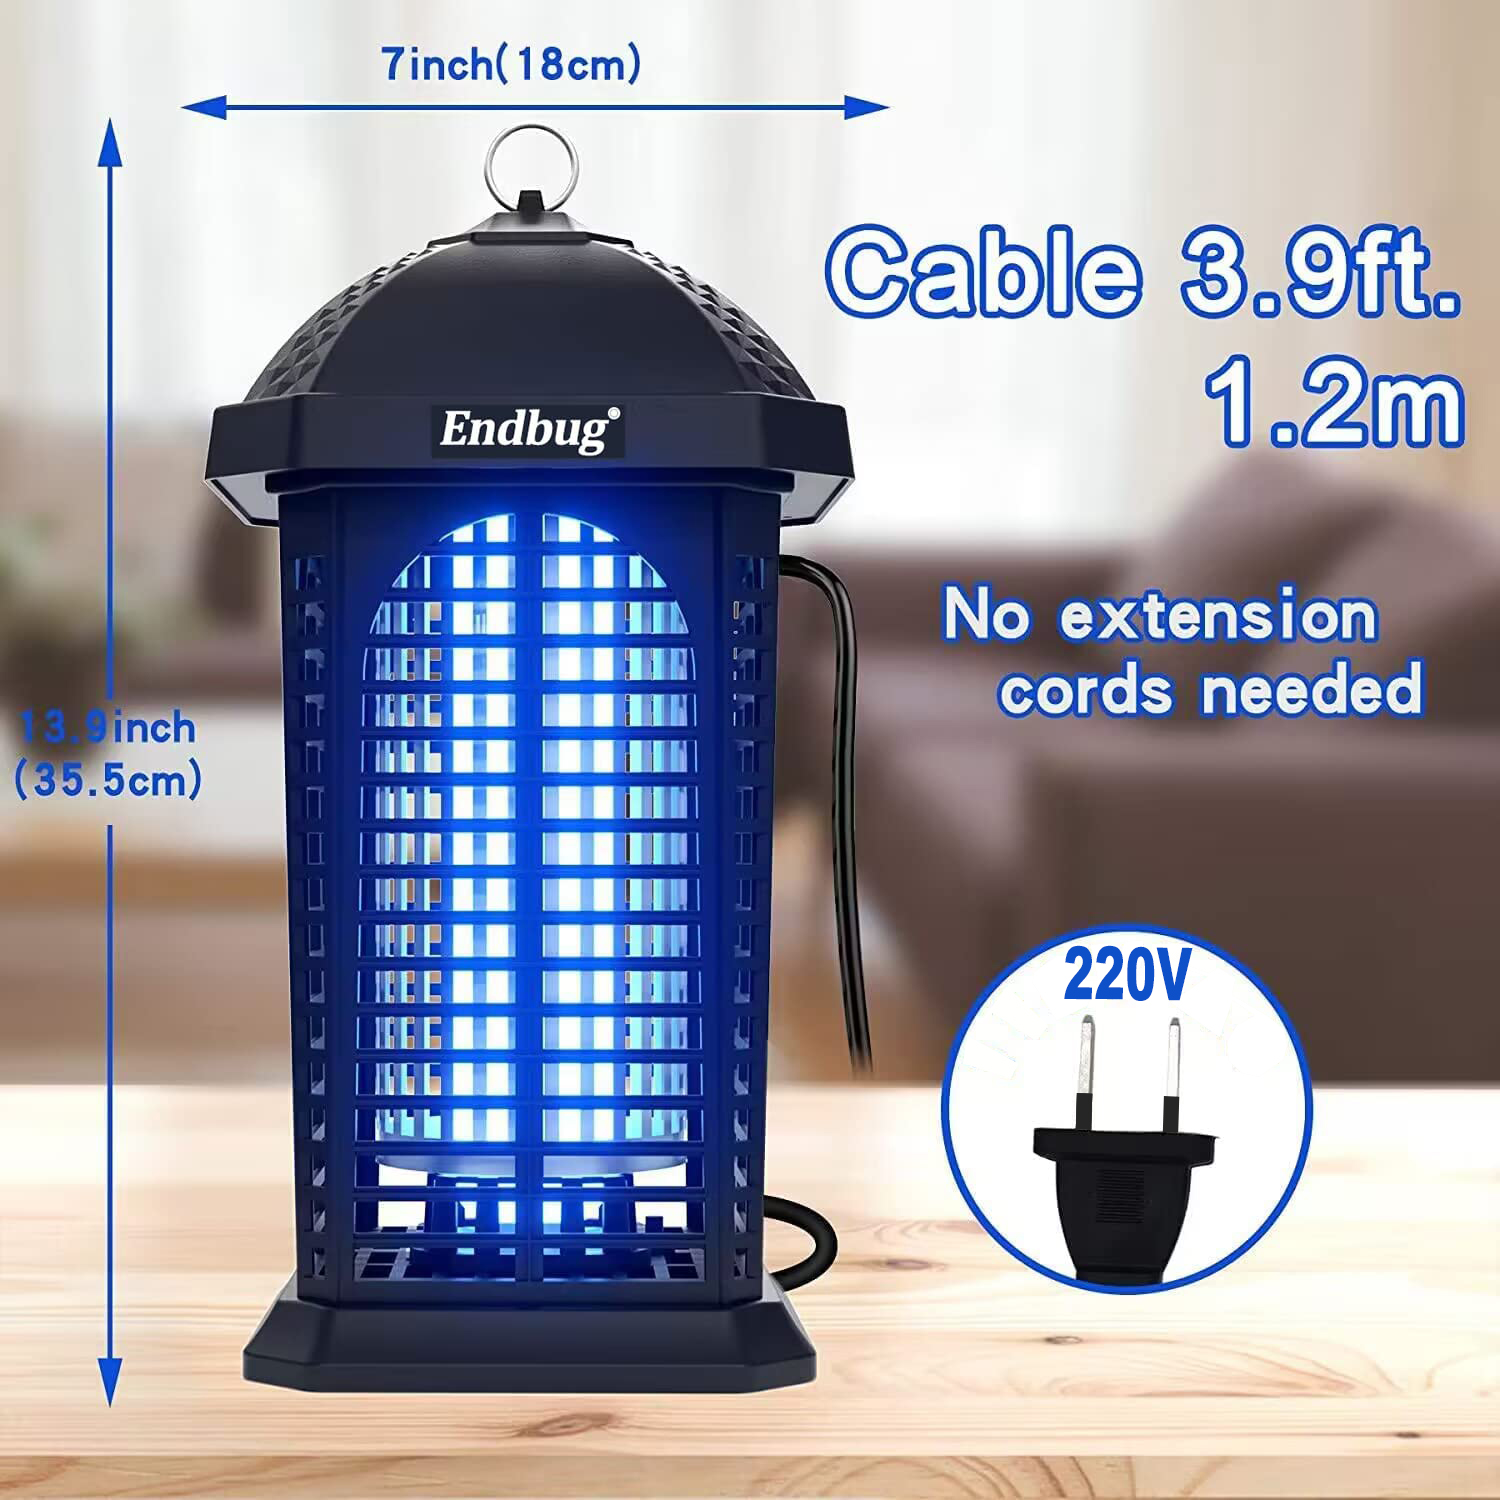 LED-Desk-Lights-Electric-Insect-Killer-Bug-Zappers-Powerful-4200V-25W-Waterproof-Mosquito-Zappers-Lamp-with-UV-Light-Protective-ABS-Housing-for-Indoor-Outdoor-86